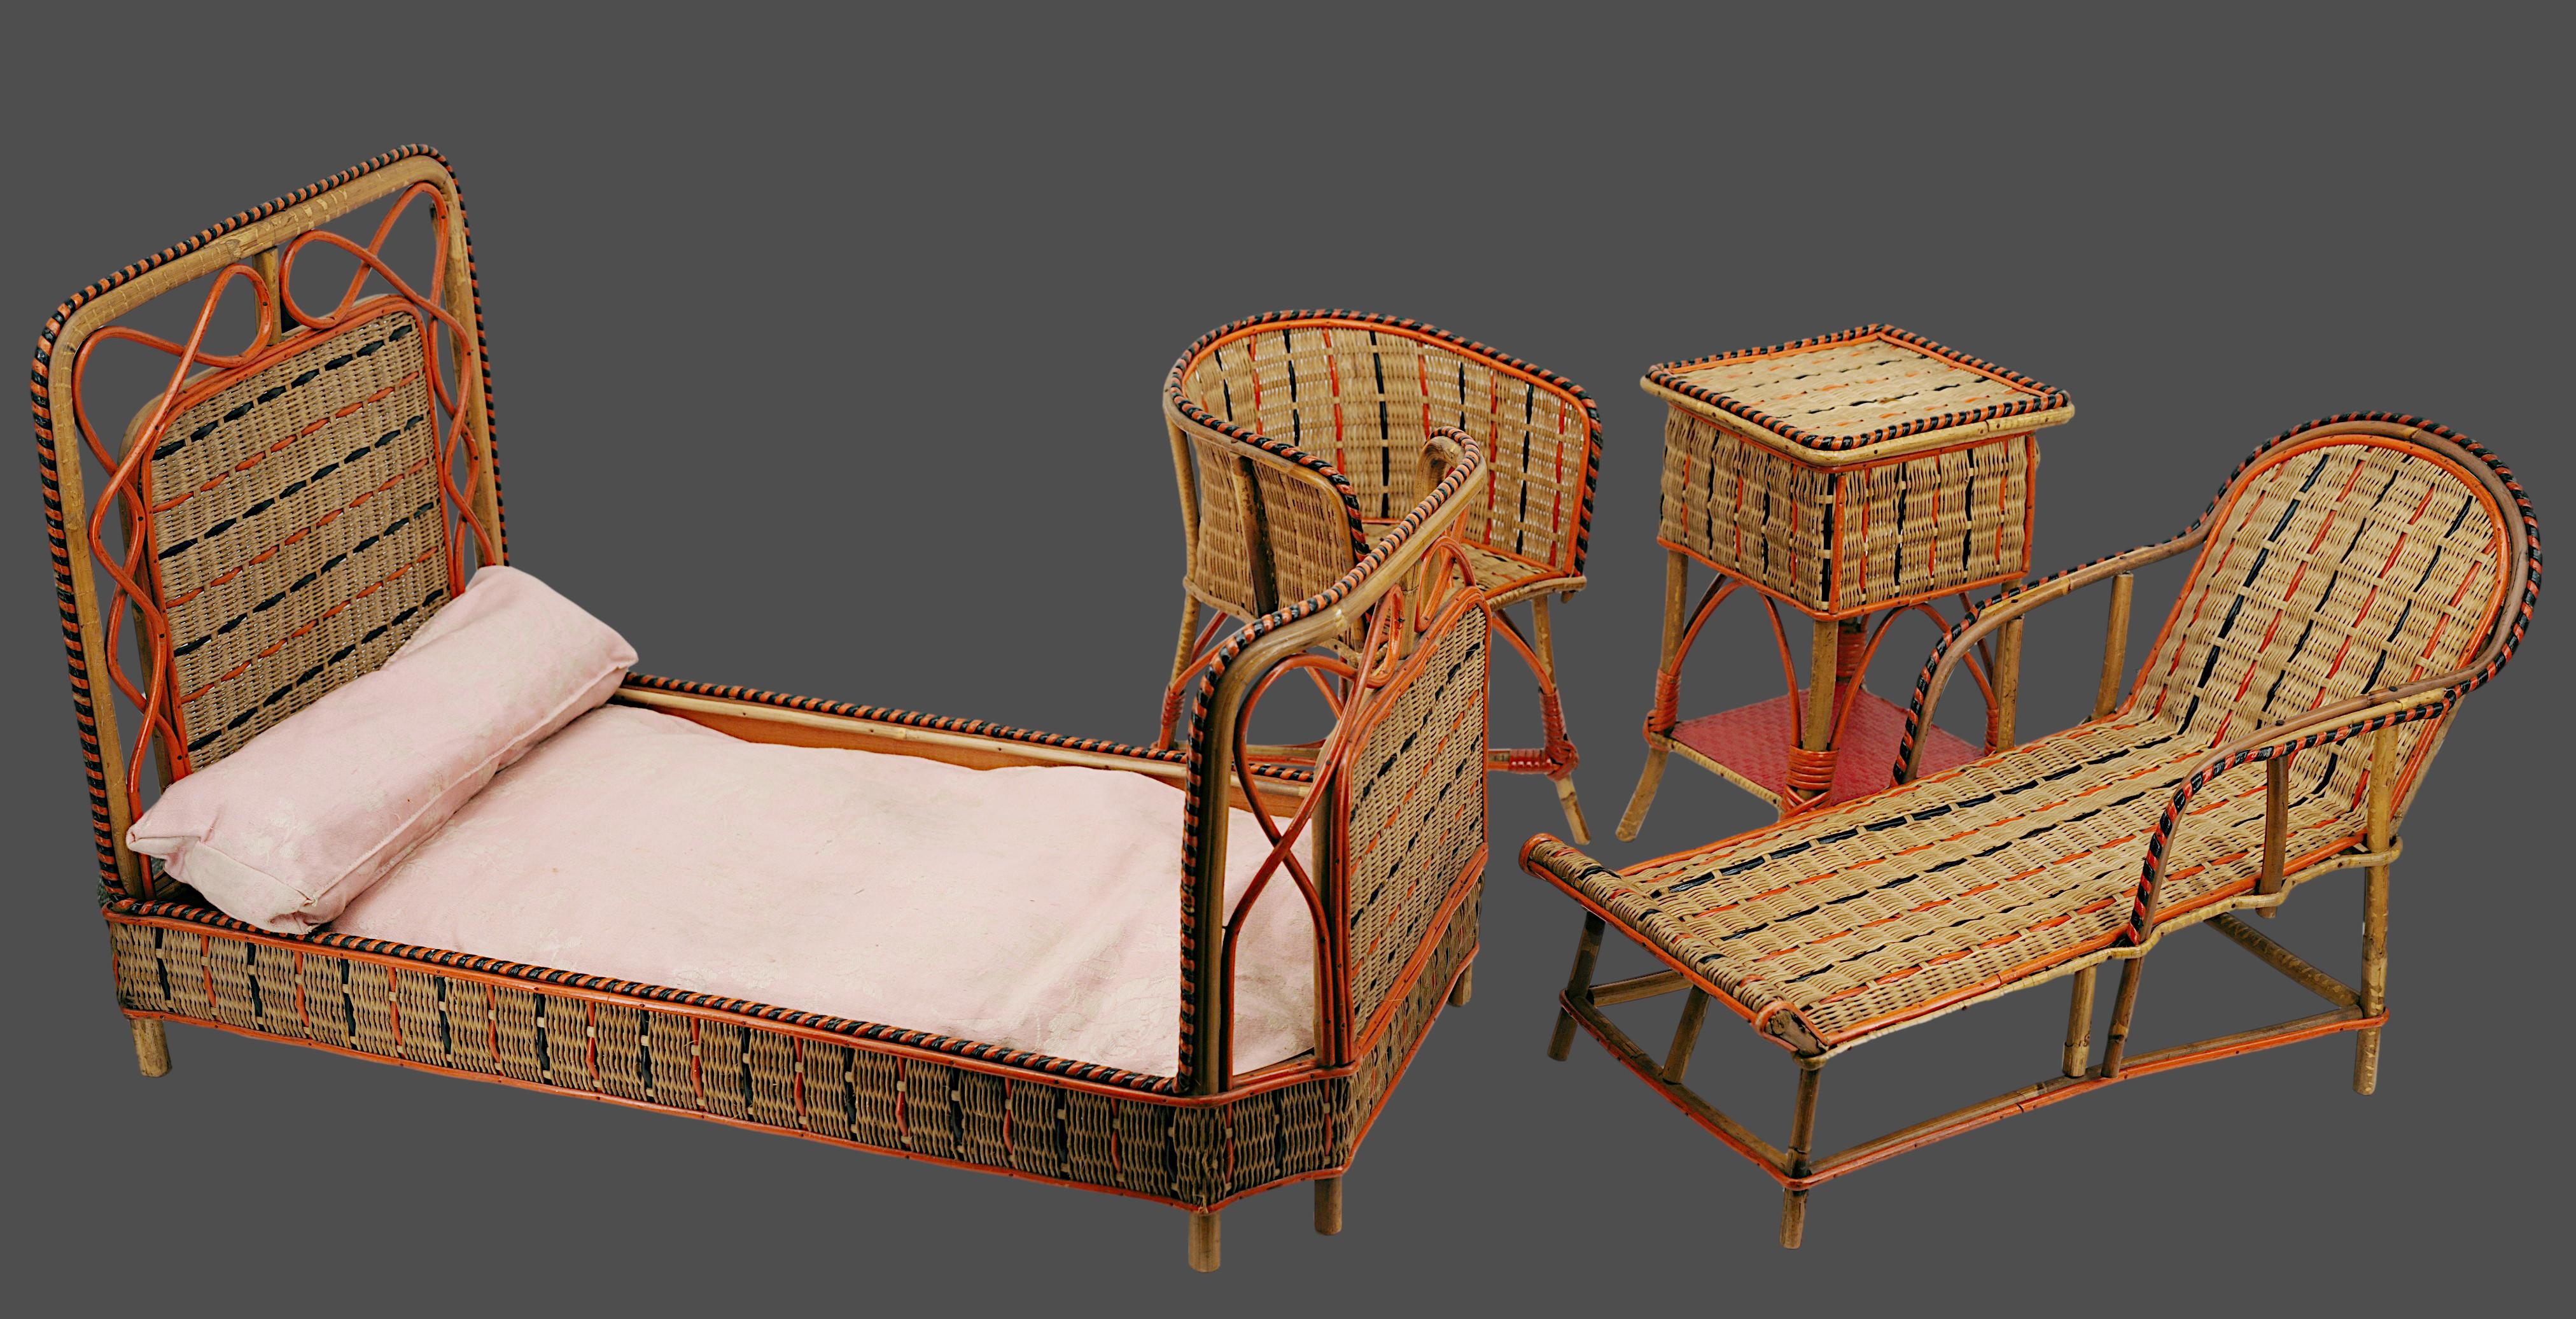 French bamboo & rattan doll's bedroom, playhouse, France, ca.1900. Bamboo, rattan, wicker & fabric. The set consists of a bed, a table, an armchair and a chaise longue. It is in very good condition for its age. Part of this set was still protected